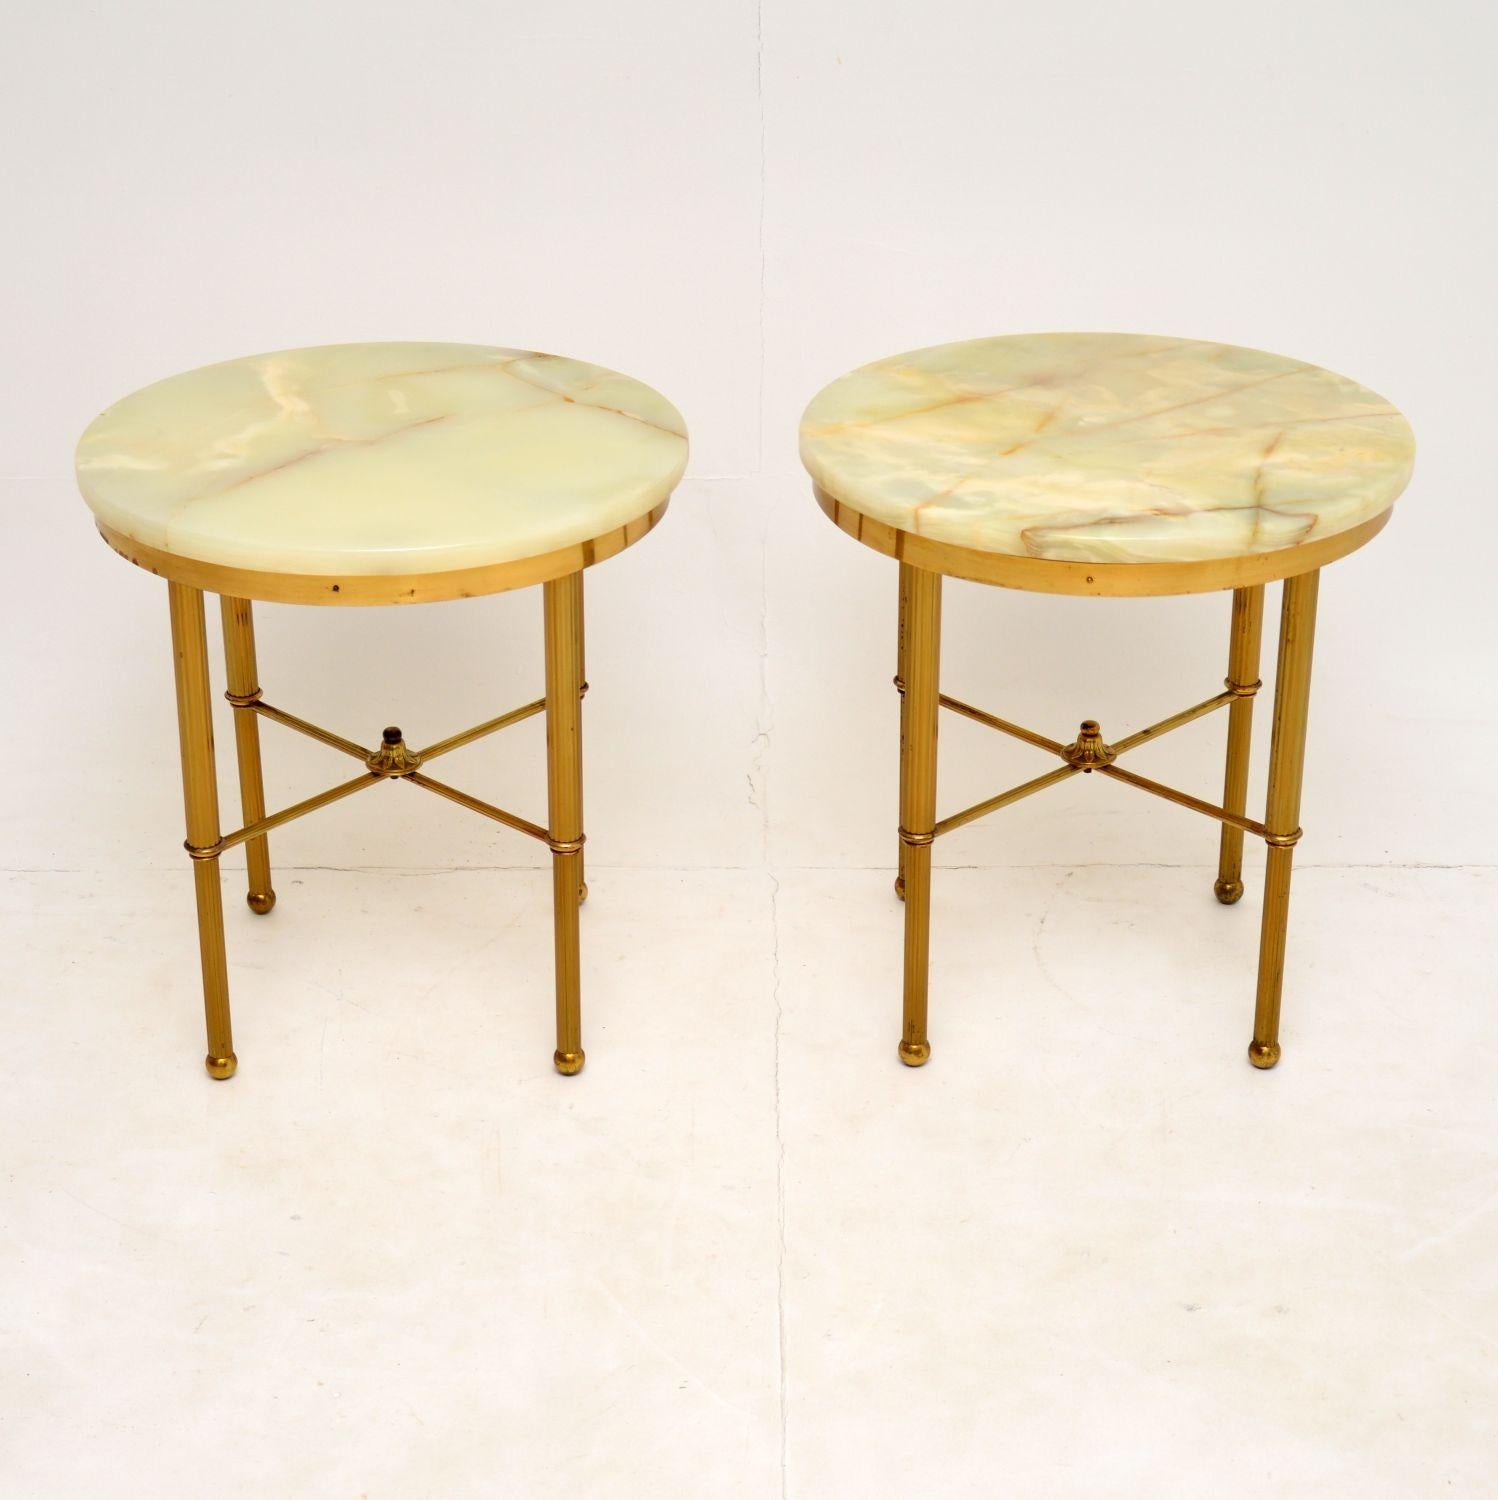 A gorgeous pair of vintage side tables, dating from the 1950-60’s, these were made in France.

They have a beautiful design, the solid brass frames have X frame stretchers and fluted legs.

The brass is in excellent condition for its age, with